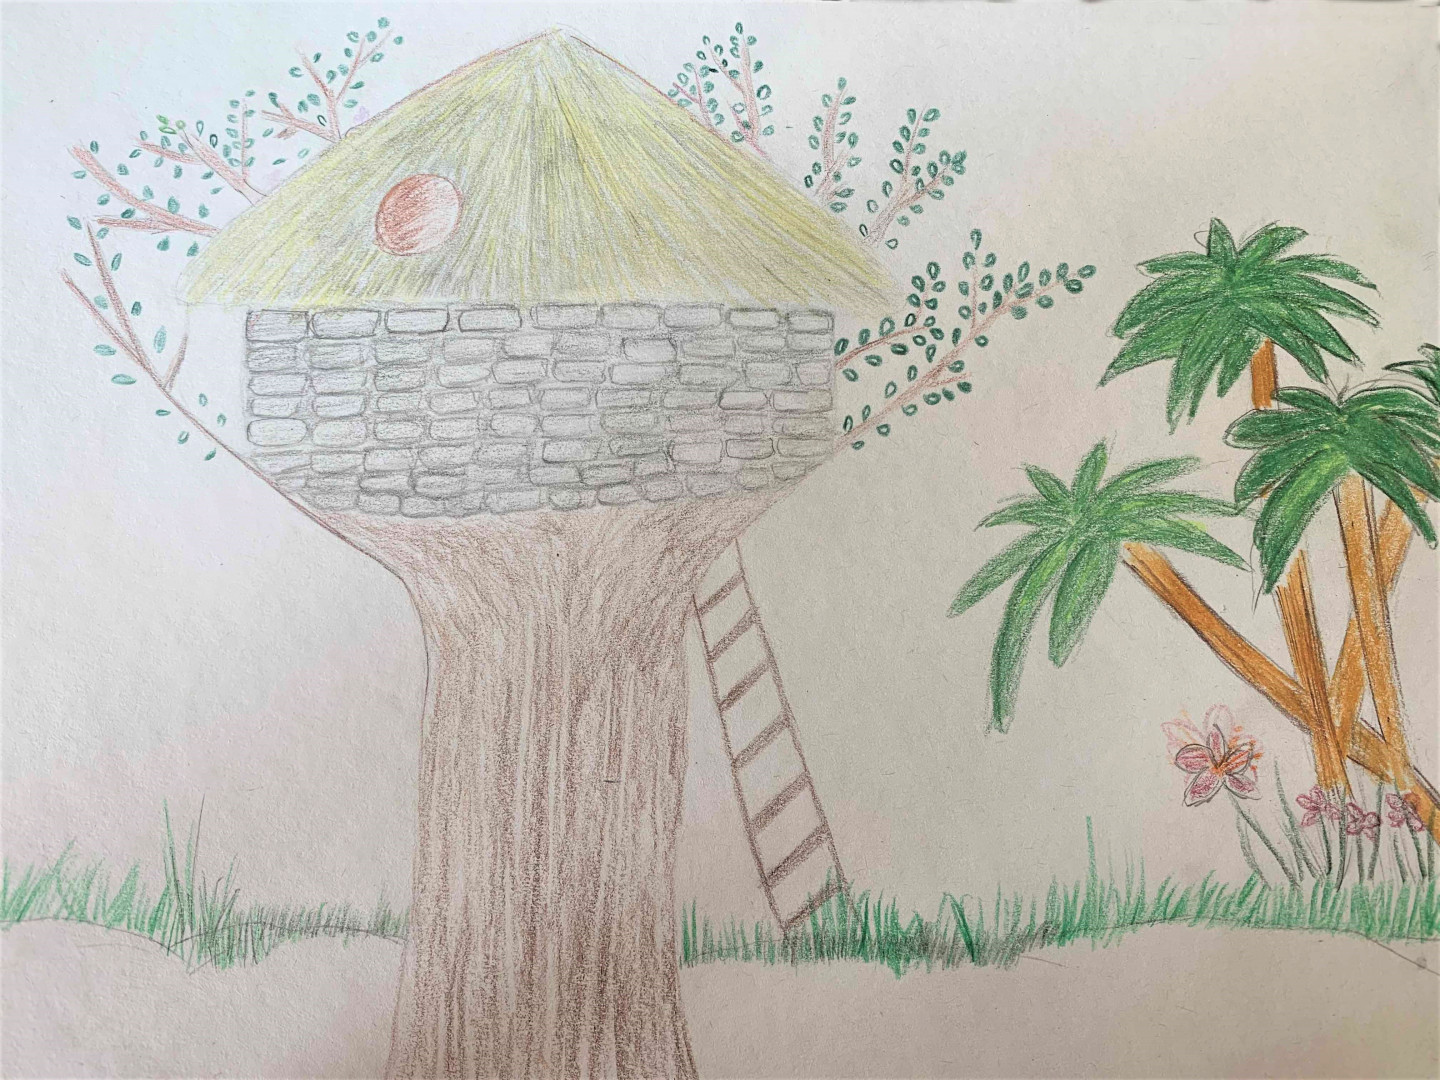 MAYA, AGE 10. A home for Maia from Into the River by Eve Ibbotson, and one of my favourite characters. This is a tree house for Maia - the main character from Into the River Sea by Eva Ibbotson. Maia is an orphan who is adopted by distant relatives in the Brazilian Amazon at the time of the rubber boom. Her relatives are horrid but she makes a friend and loves the Amazon. This is the kind of house she would like - above ground to get a great view and be near the birds and monkeys, and away from the horrid family. It’s made of sustainable materials she can find in the jungle, mud bricks, a straw or dried grass roof, a rope and wood ladder to get her up and down.